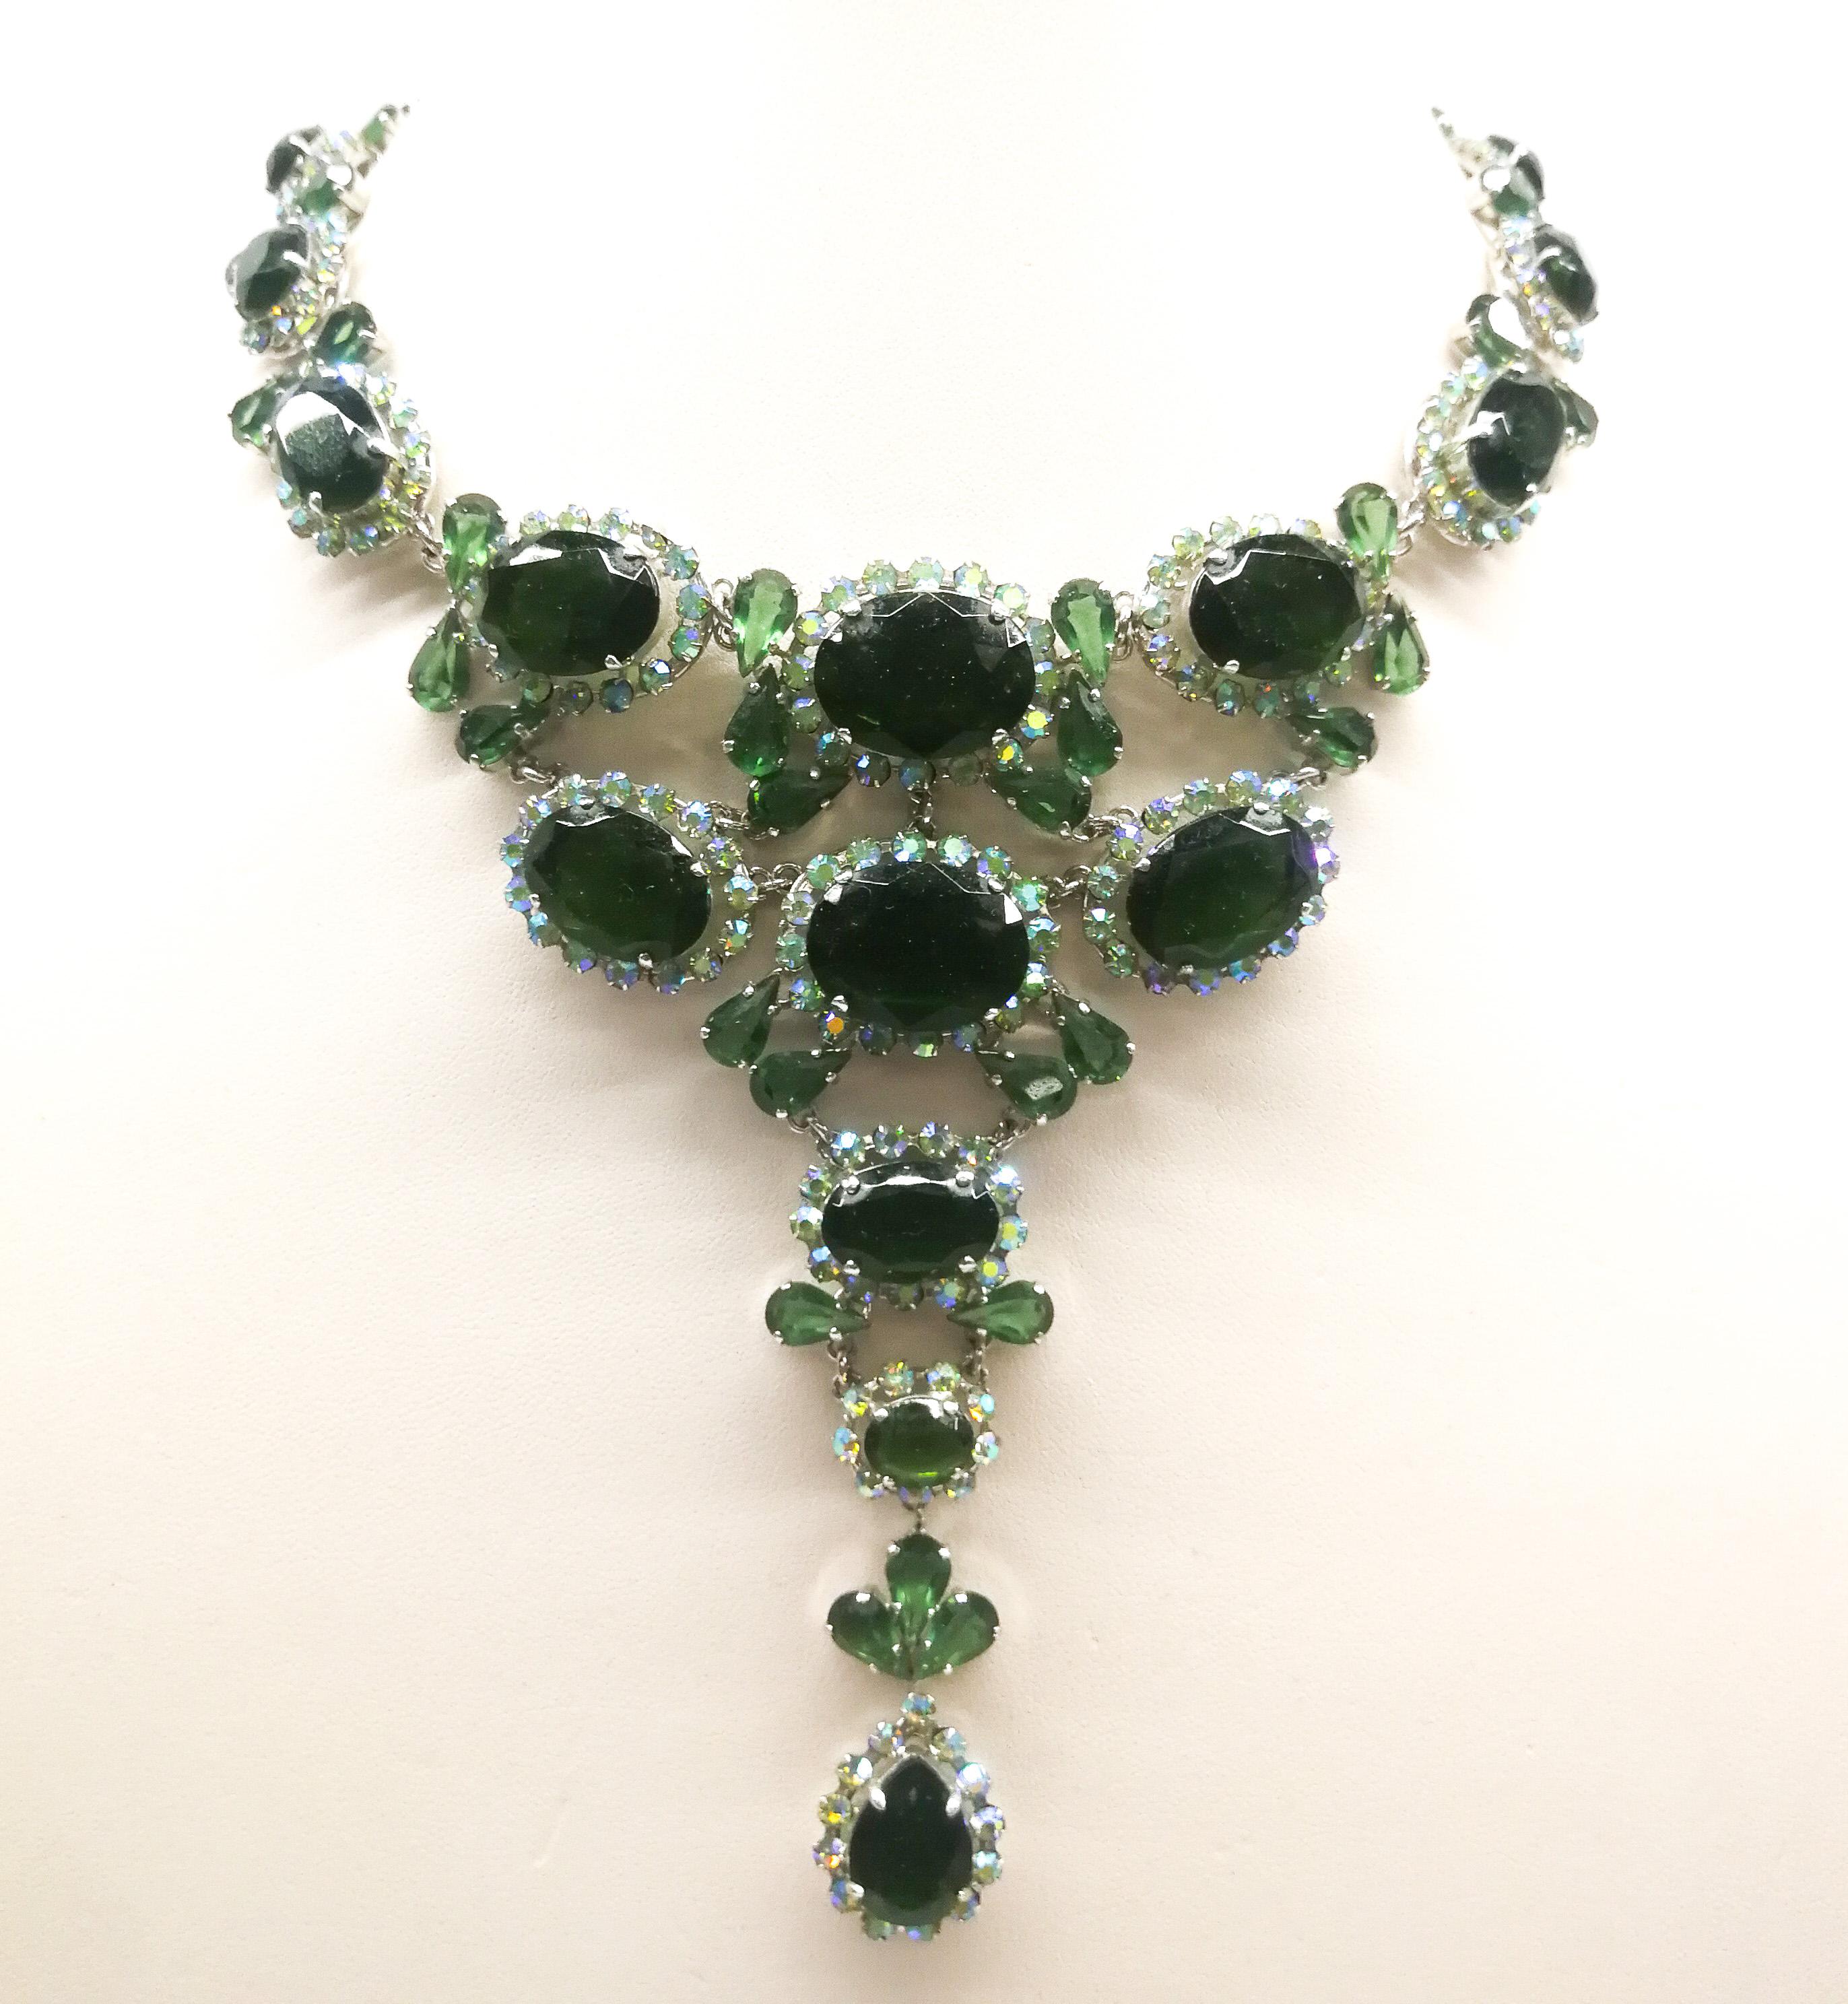 A very striking necklace and earrings, Henkel & Grosse for Christian Dior, 1957. 9